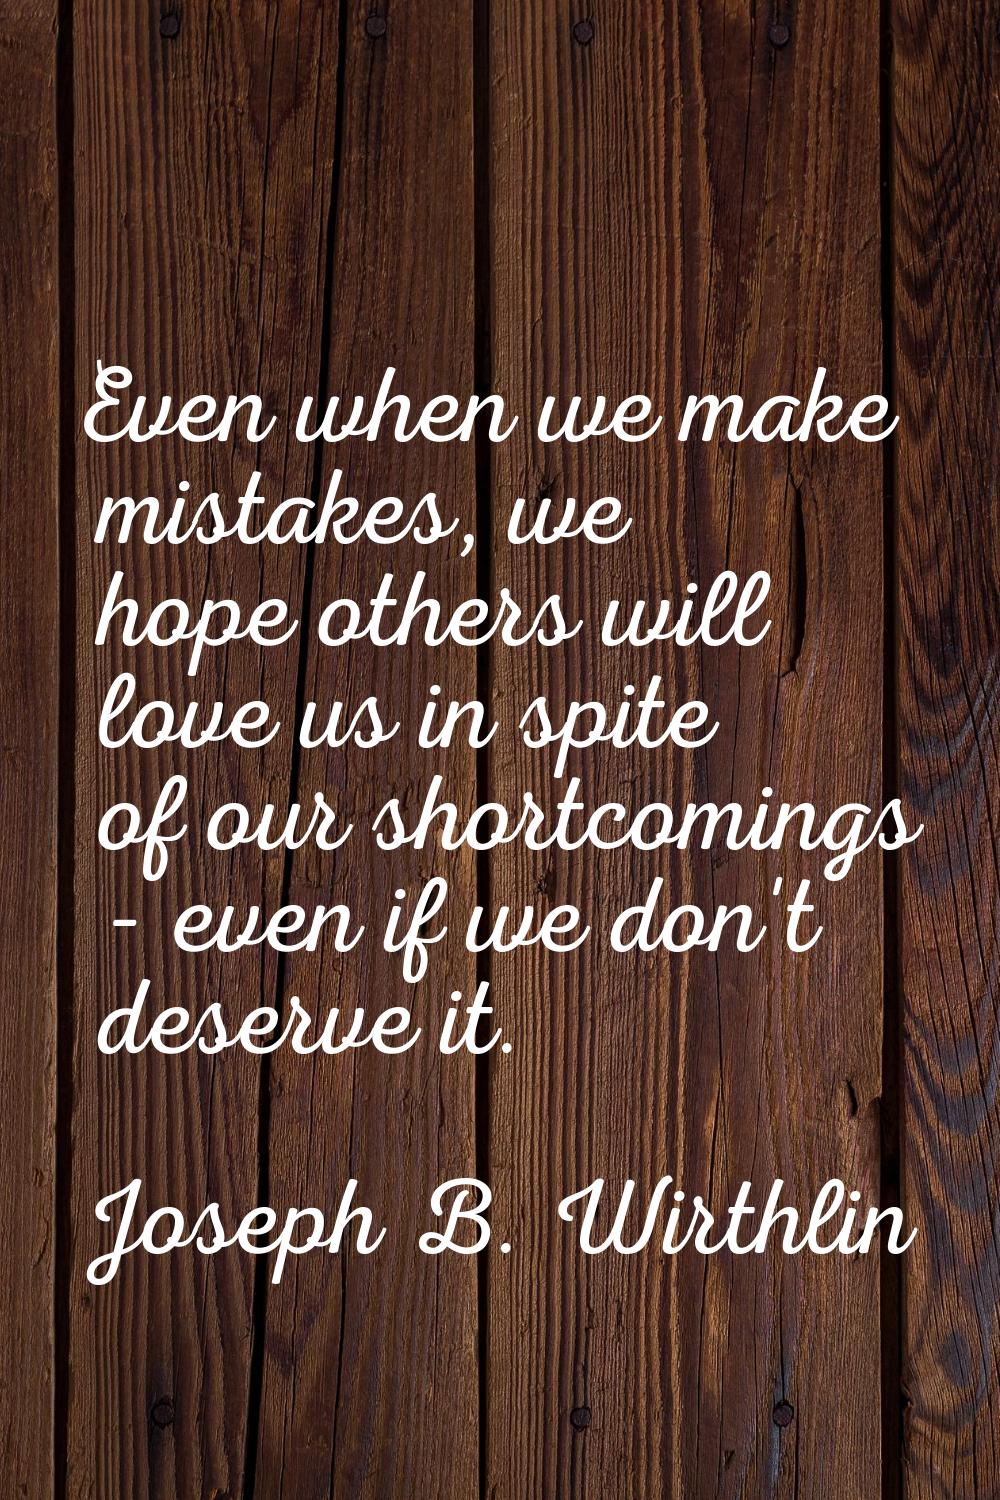 Even when we make mistakes, we hope others will love us in spite of our shortcomings - even if we d